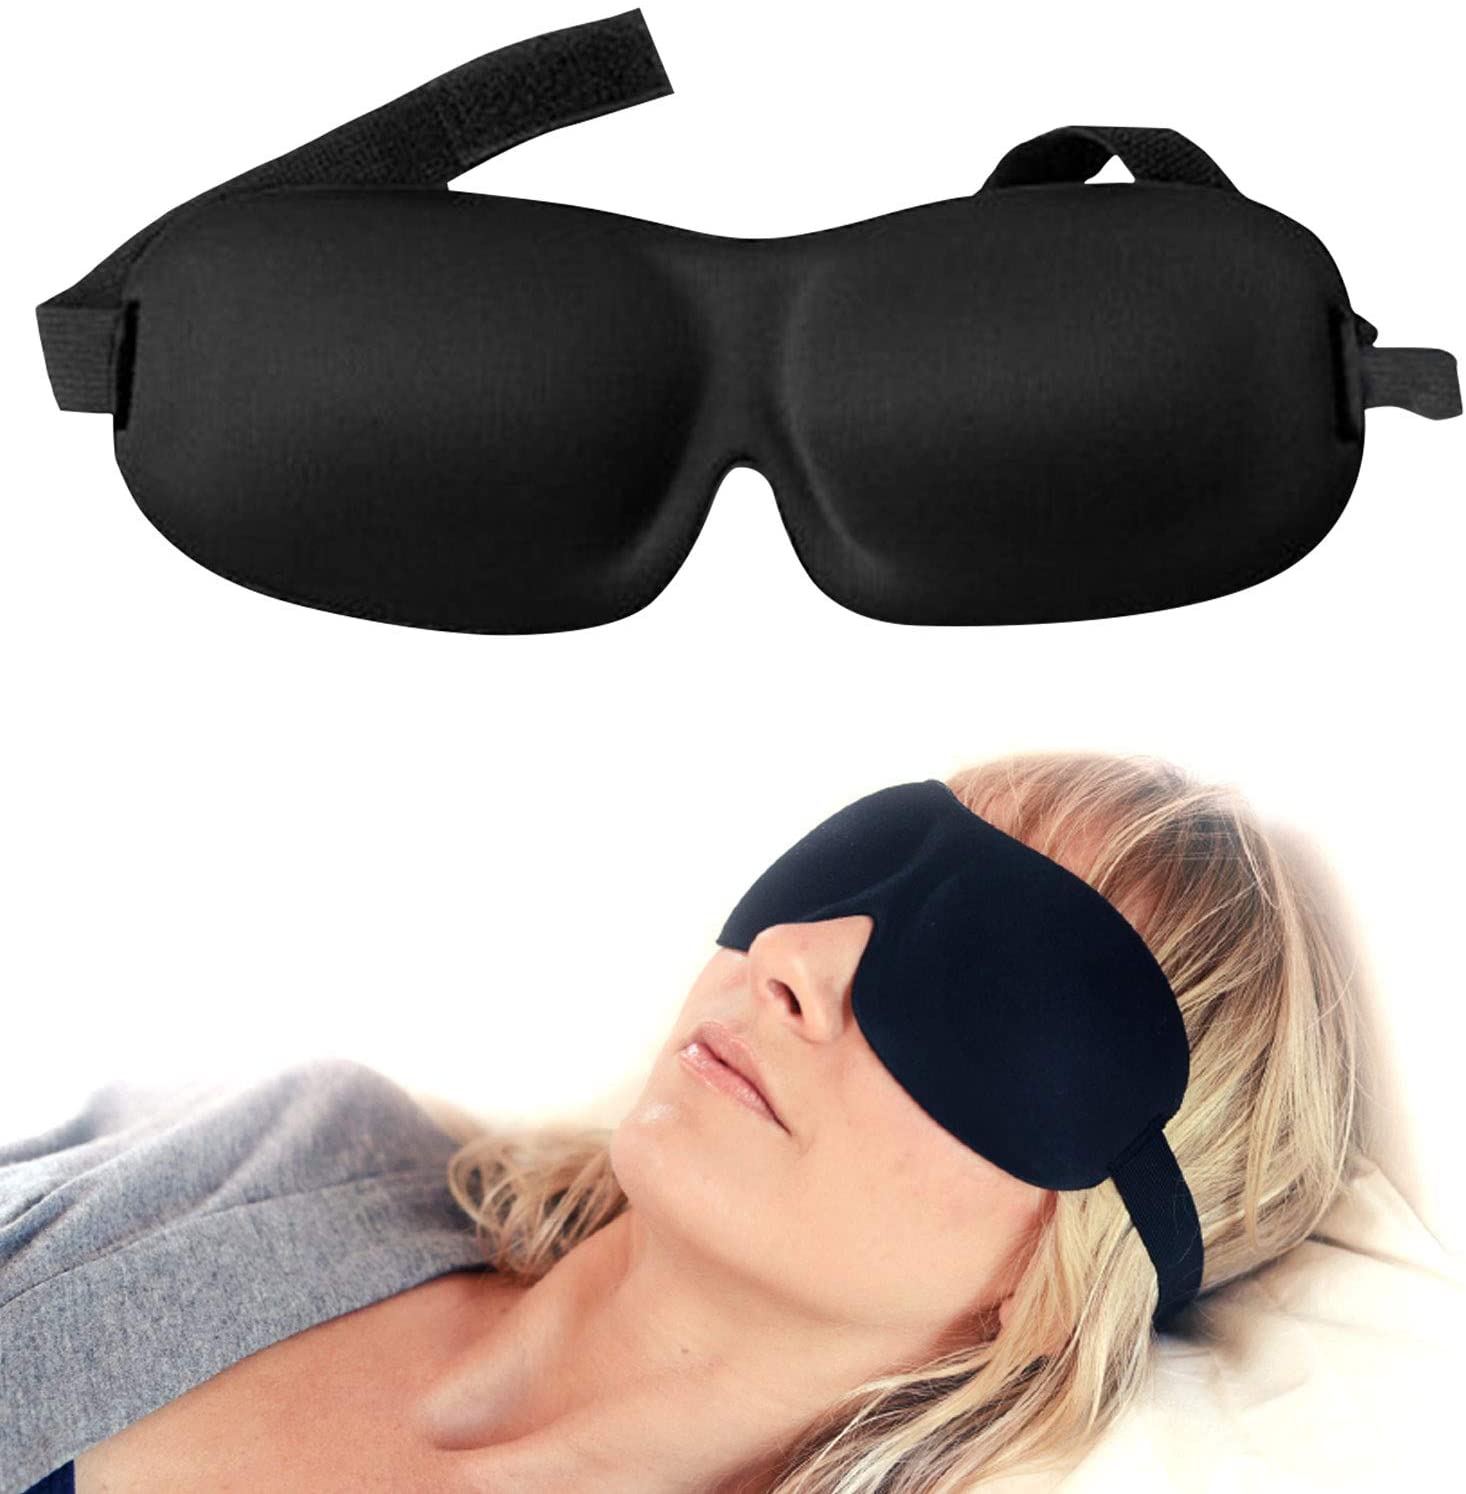 Deep Rest Eye Mask with Contoured Shape and Adjustable Head Strap, Perfect for Side Sleeper, Light Blocking, Sleep Deeply Anywhere, Anytime, Wake Up Refreshed - e4cents